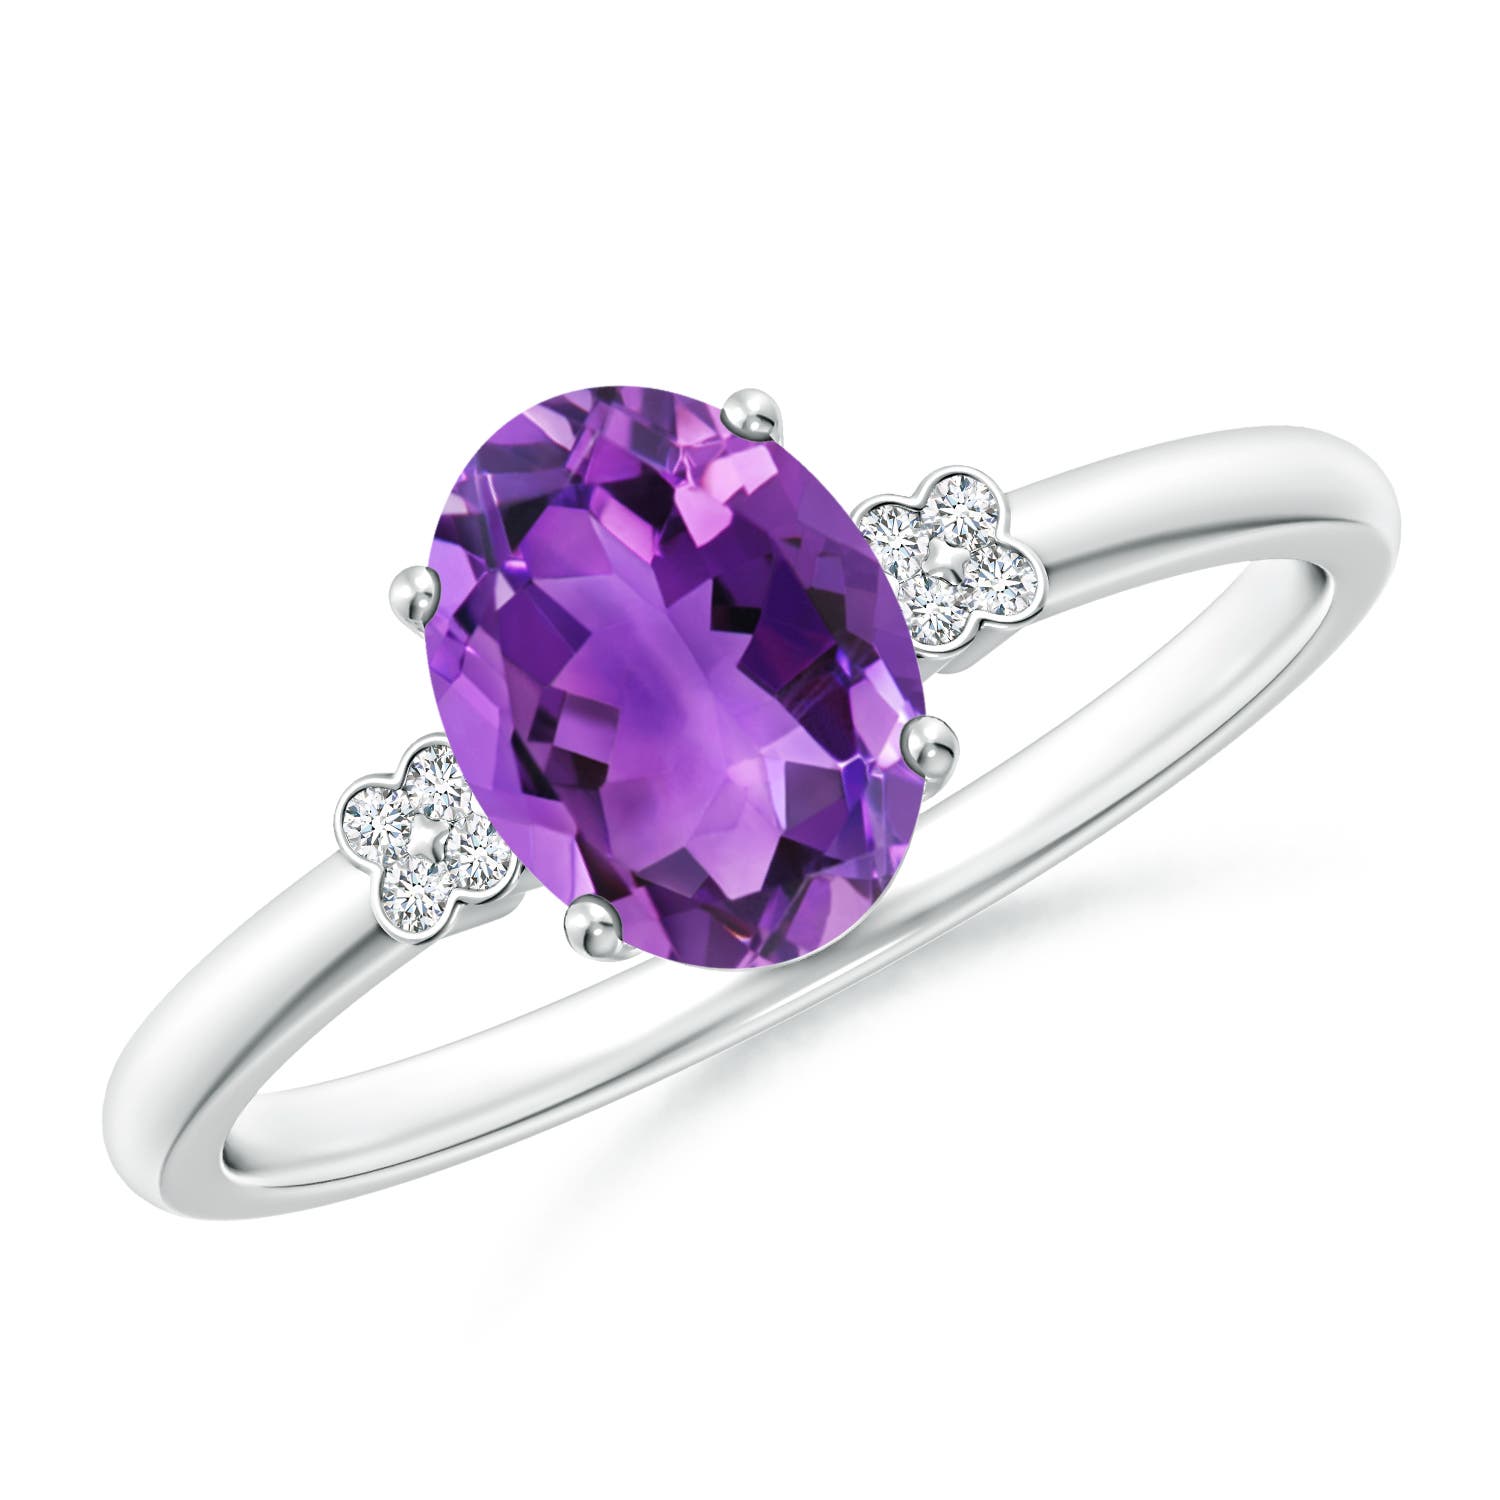 AAA - Amethyst / 1.2 CT / 14 KT White Gold